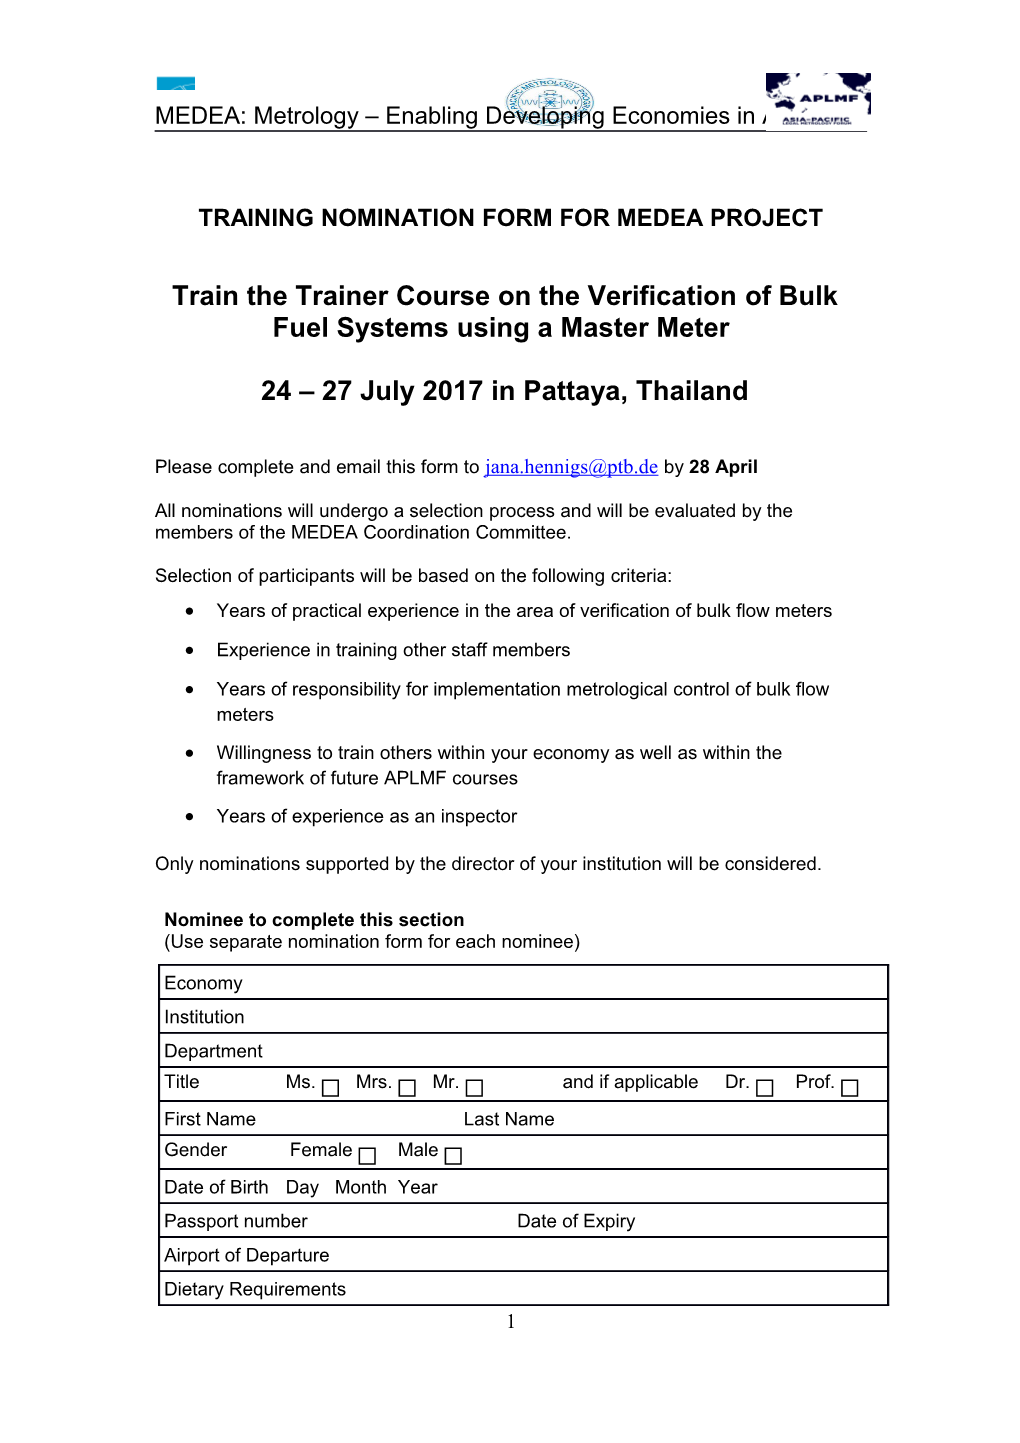 Nomination Form for the APMP DEC/TCQM Measurement Uncertainty Training Course to Be Held